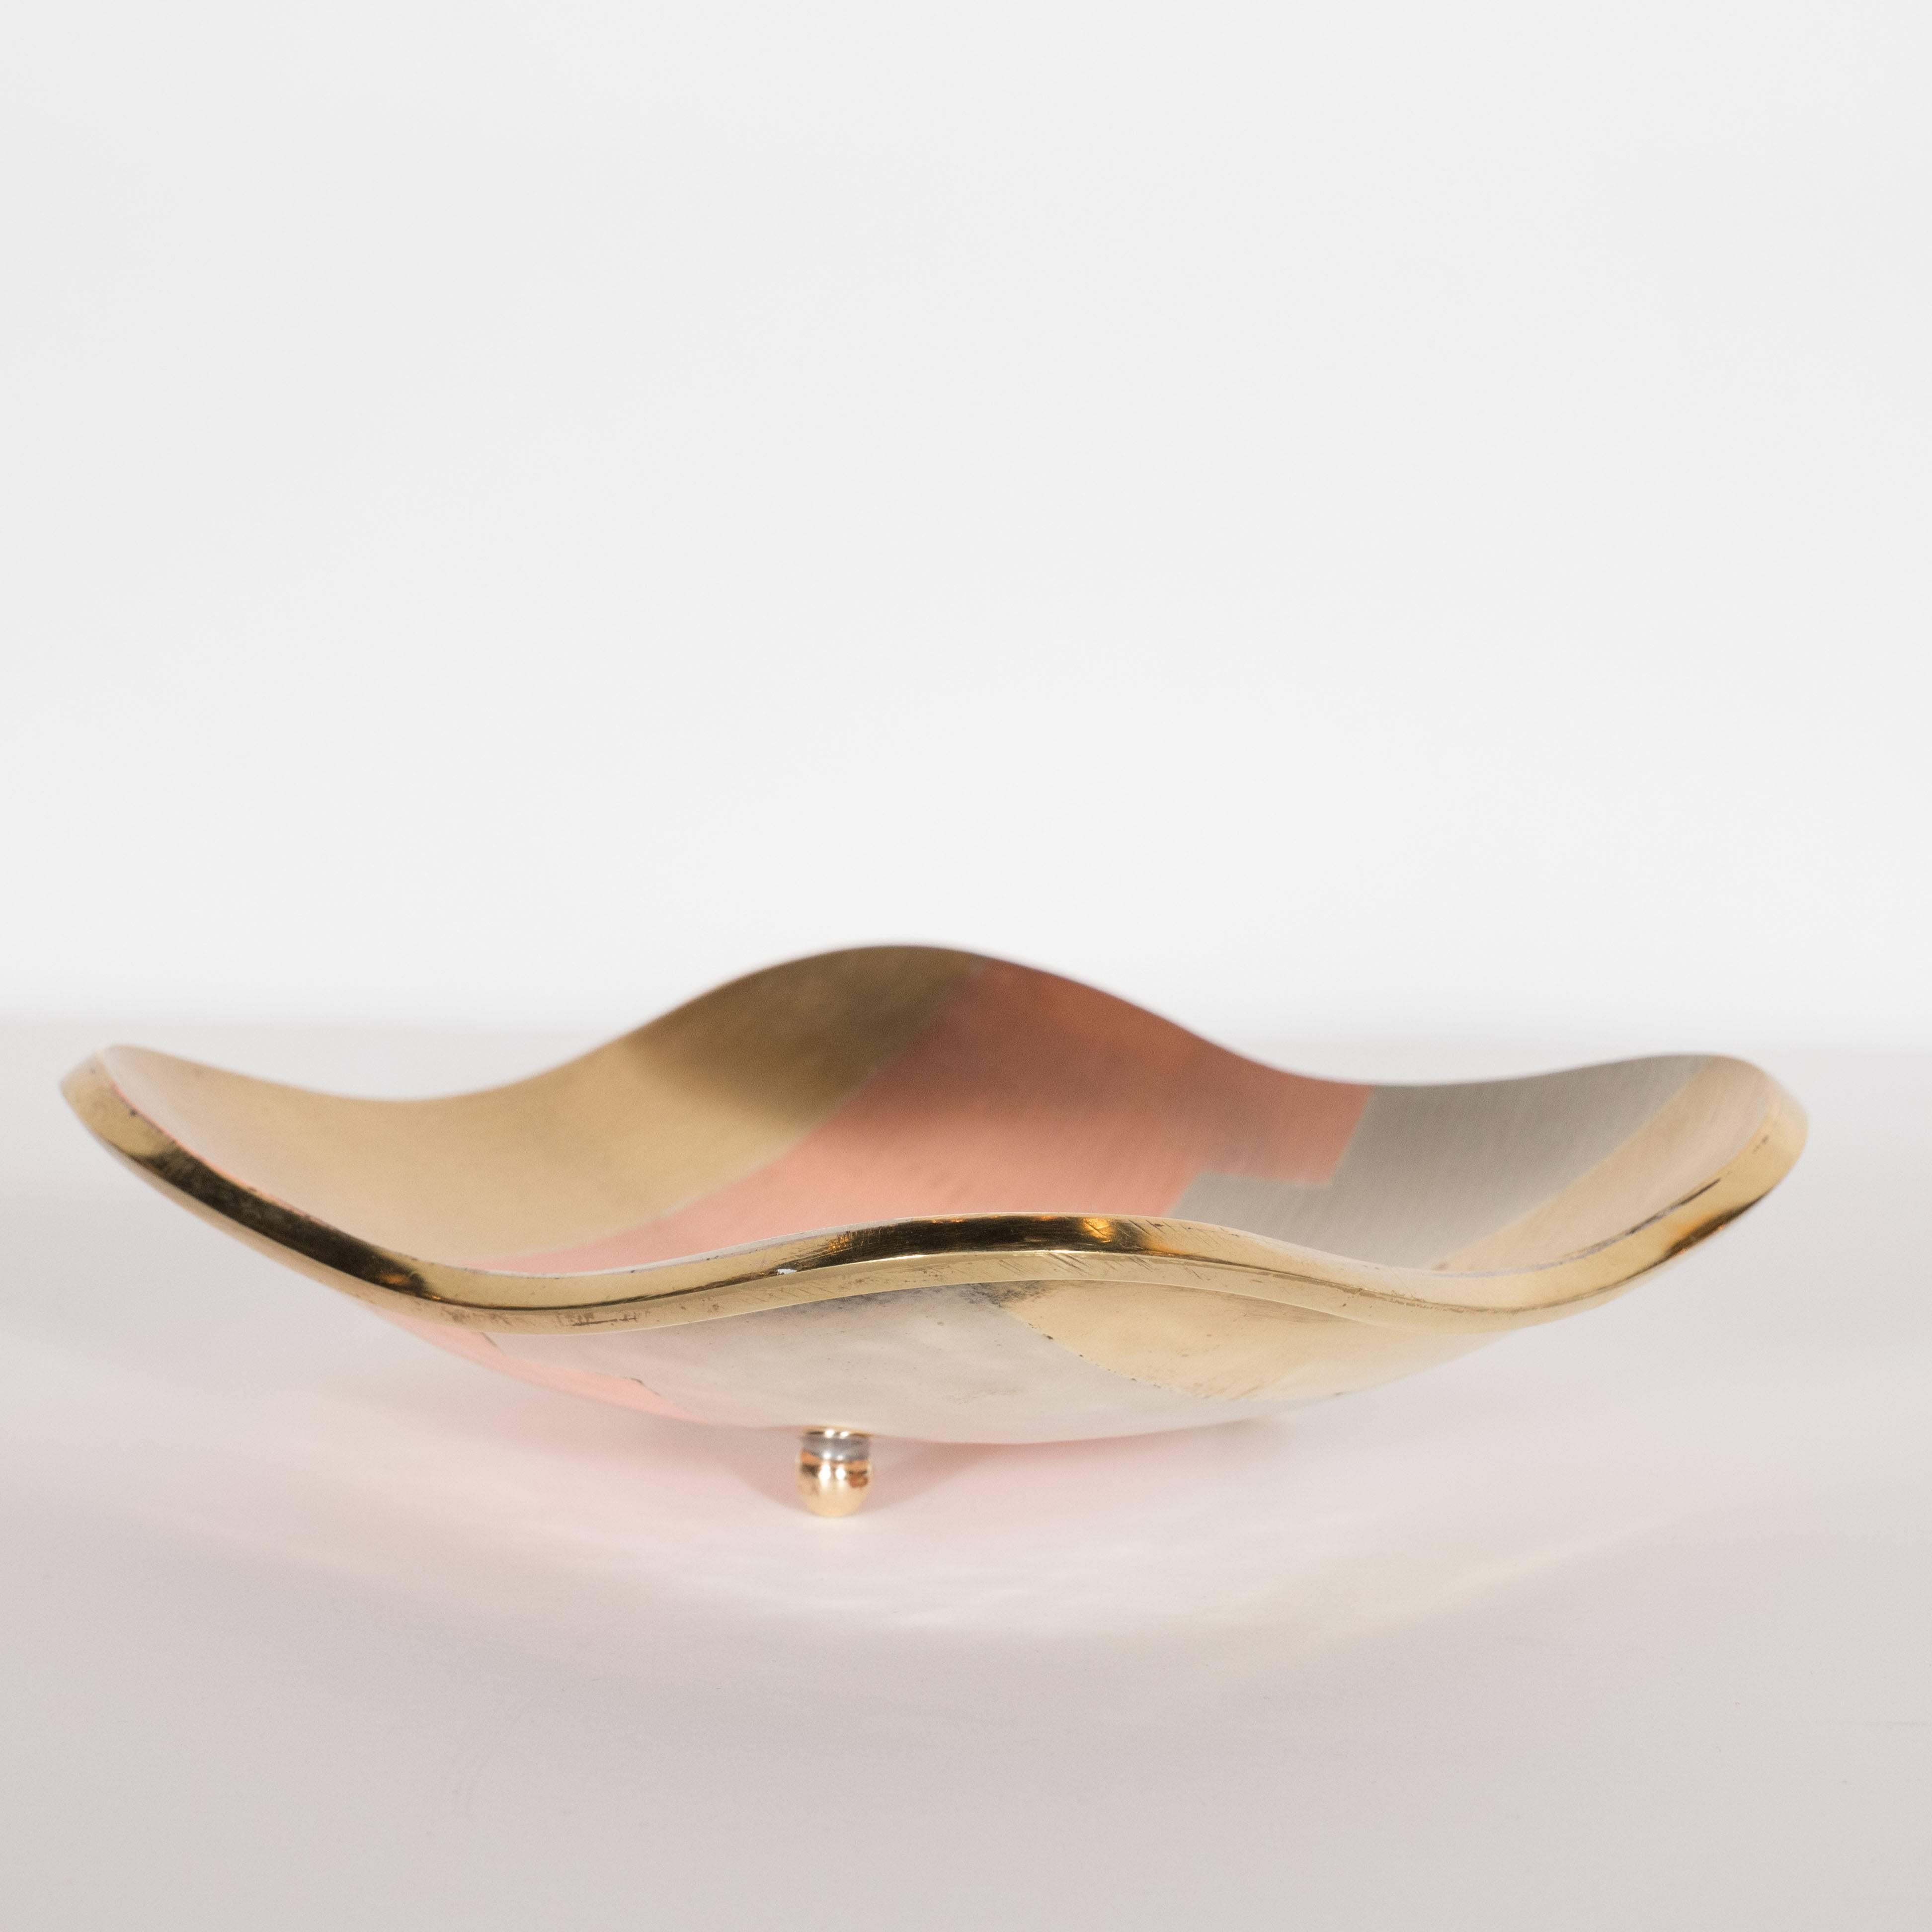 American Mid-Century Modern Dish in Platinum, Copper and Gold Tones